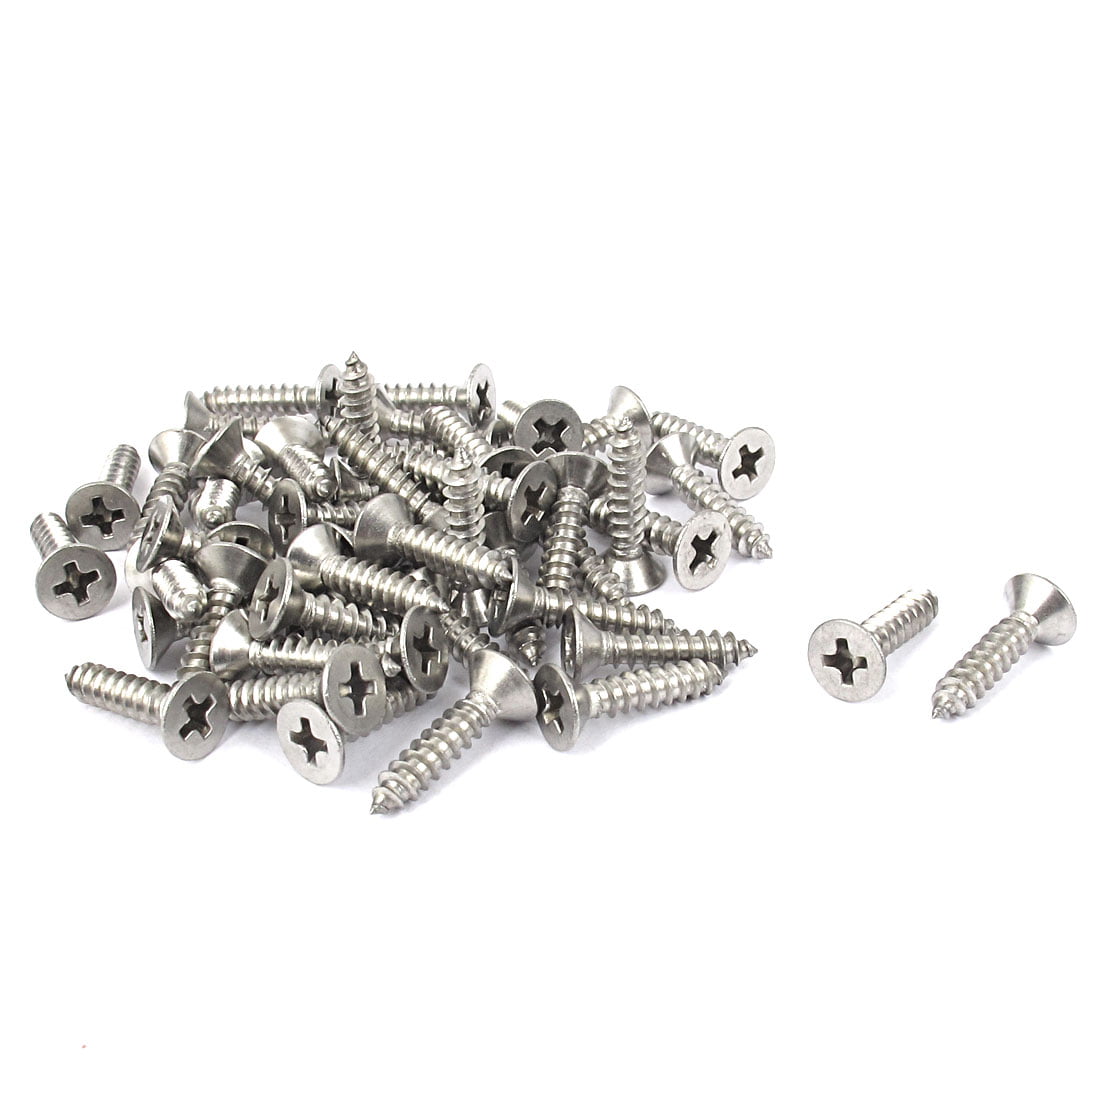 50/100pcs M3.5 Stainless Steel Flat Head Cross Phillips Self Tapping Screw 